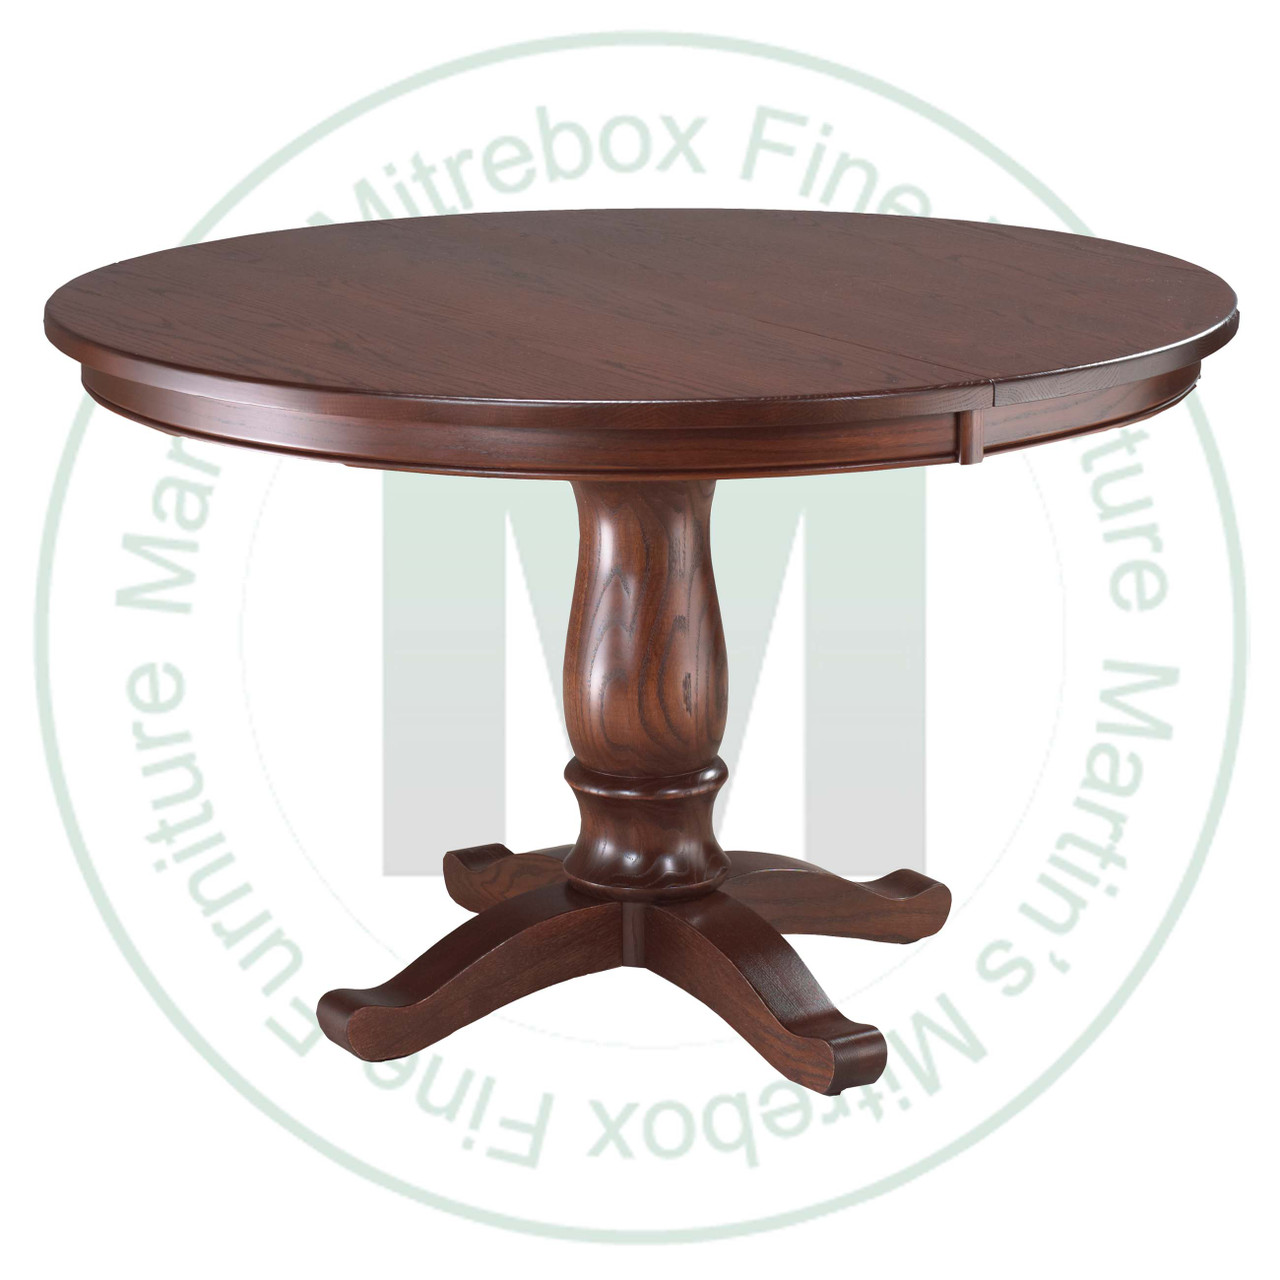 Oak Kimberly Crest Single Pedestal Table 36''D x 42''W x 30''H With 1 - 12'' Leaf Table. Table Has 1'' Thick Top.